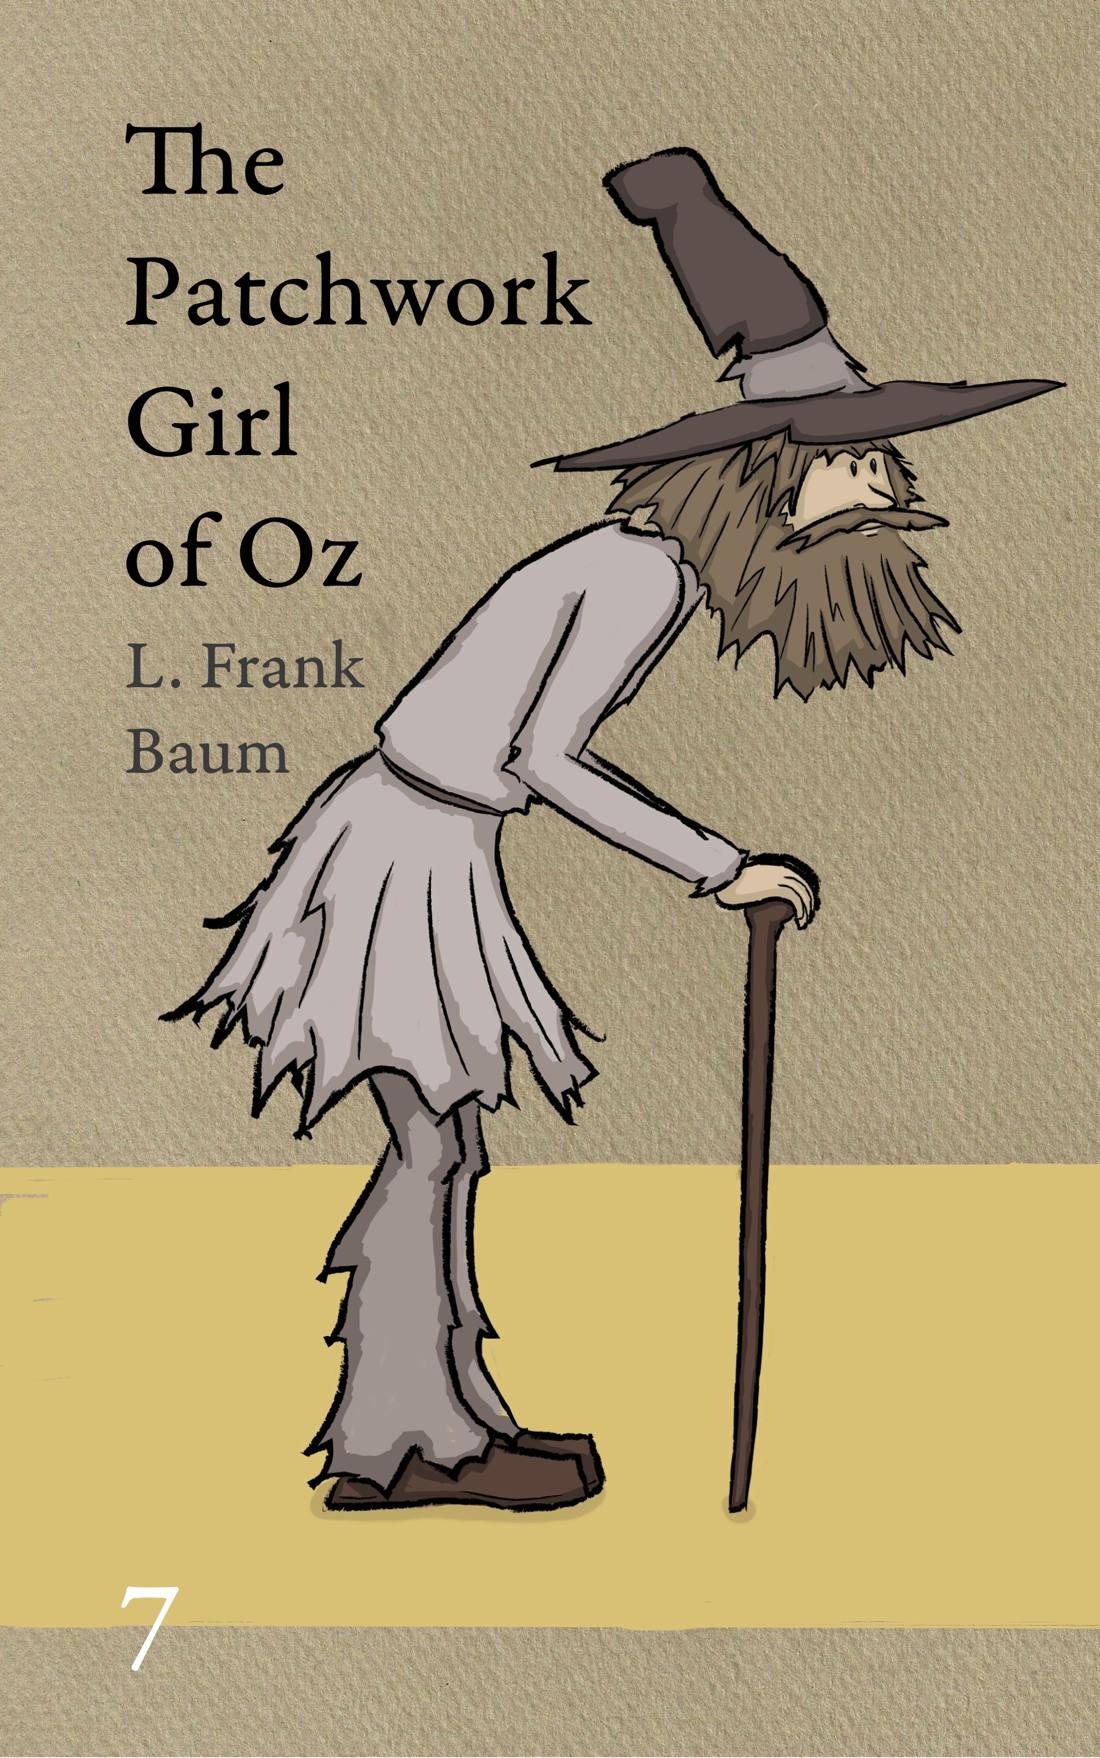 The cover of OZ book 7 showing Shaggy Man